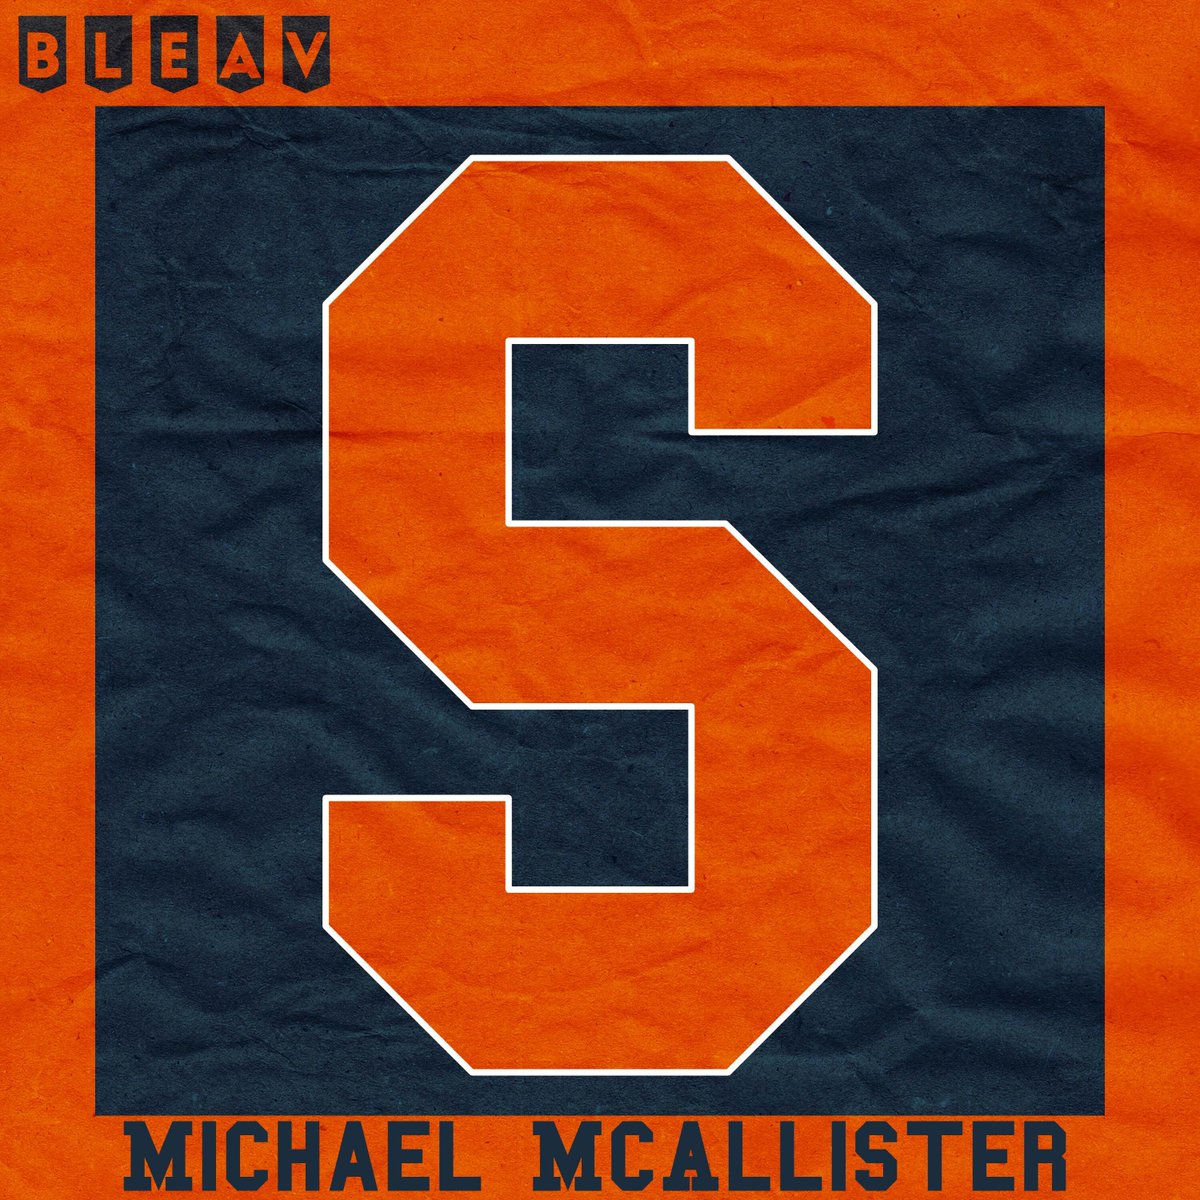 Bleav in Syracuse Episode 30, presented by @betonline_ag & @hofmannsausage is out! @KyleLeff & I rant about Sean Tucker’s exclusion on a top RBs list, breakdown the Orange’s win over Clemson and look at the upcoming schedule. https://t.co/PDZ4lUnHHz https://t.co/0WGOPedLiY